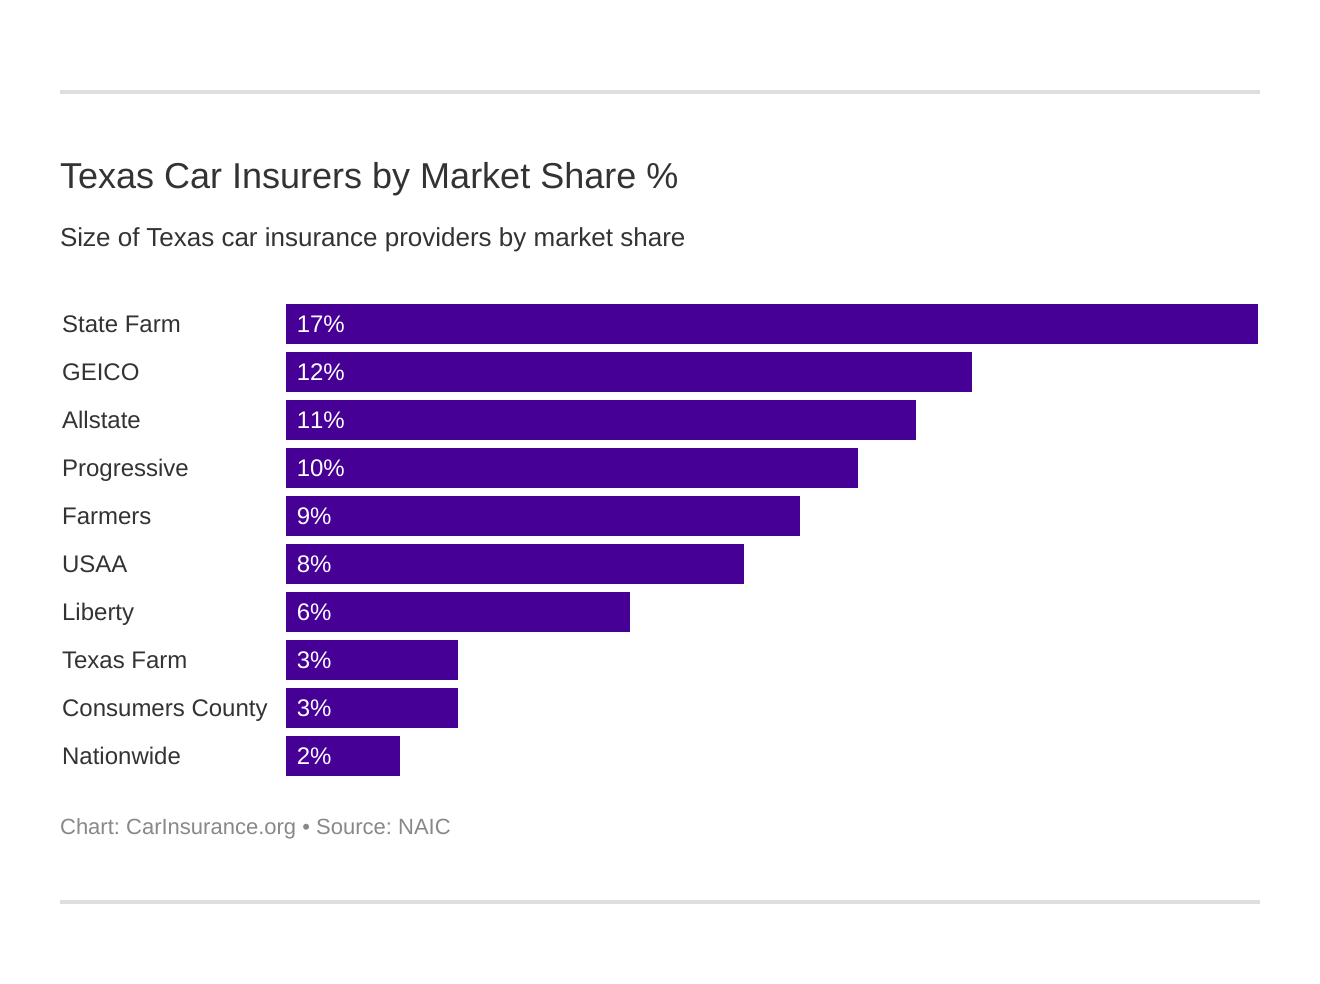 Texas Car Insurers by Market Share %